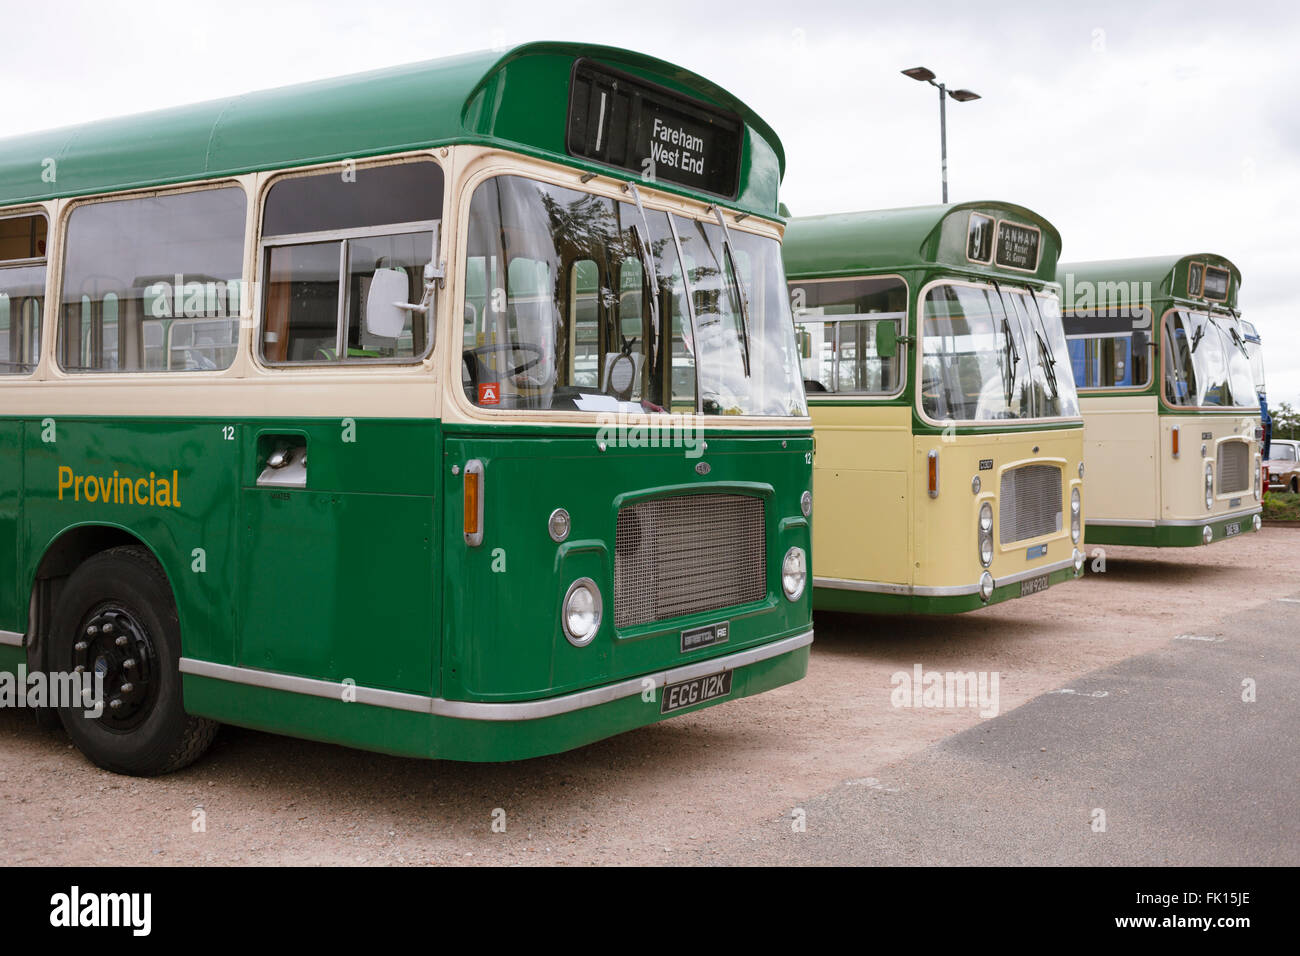 A row of three green and cream vintage buses, a Bristol RELL6G in Provincial livery in the foreground, at the Vintage Bus Rally. Stock Photo